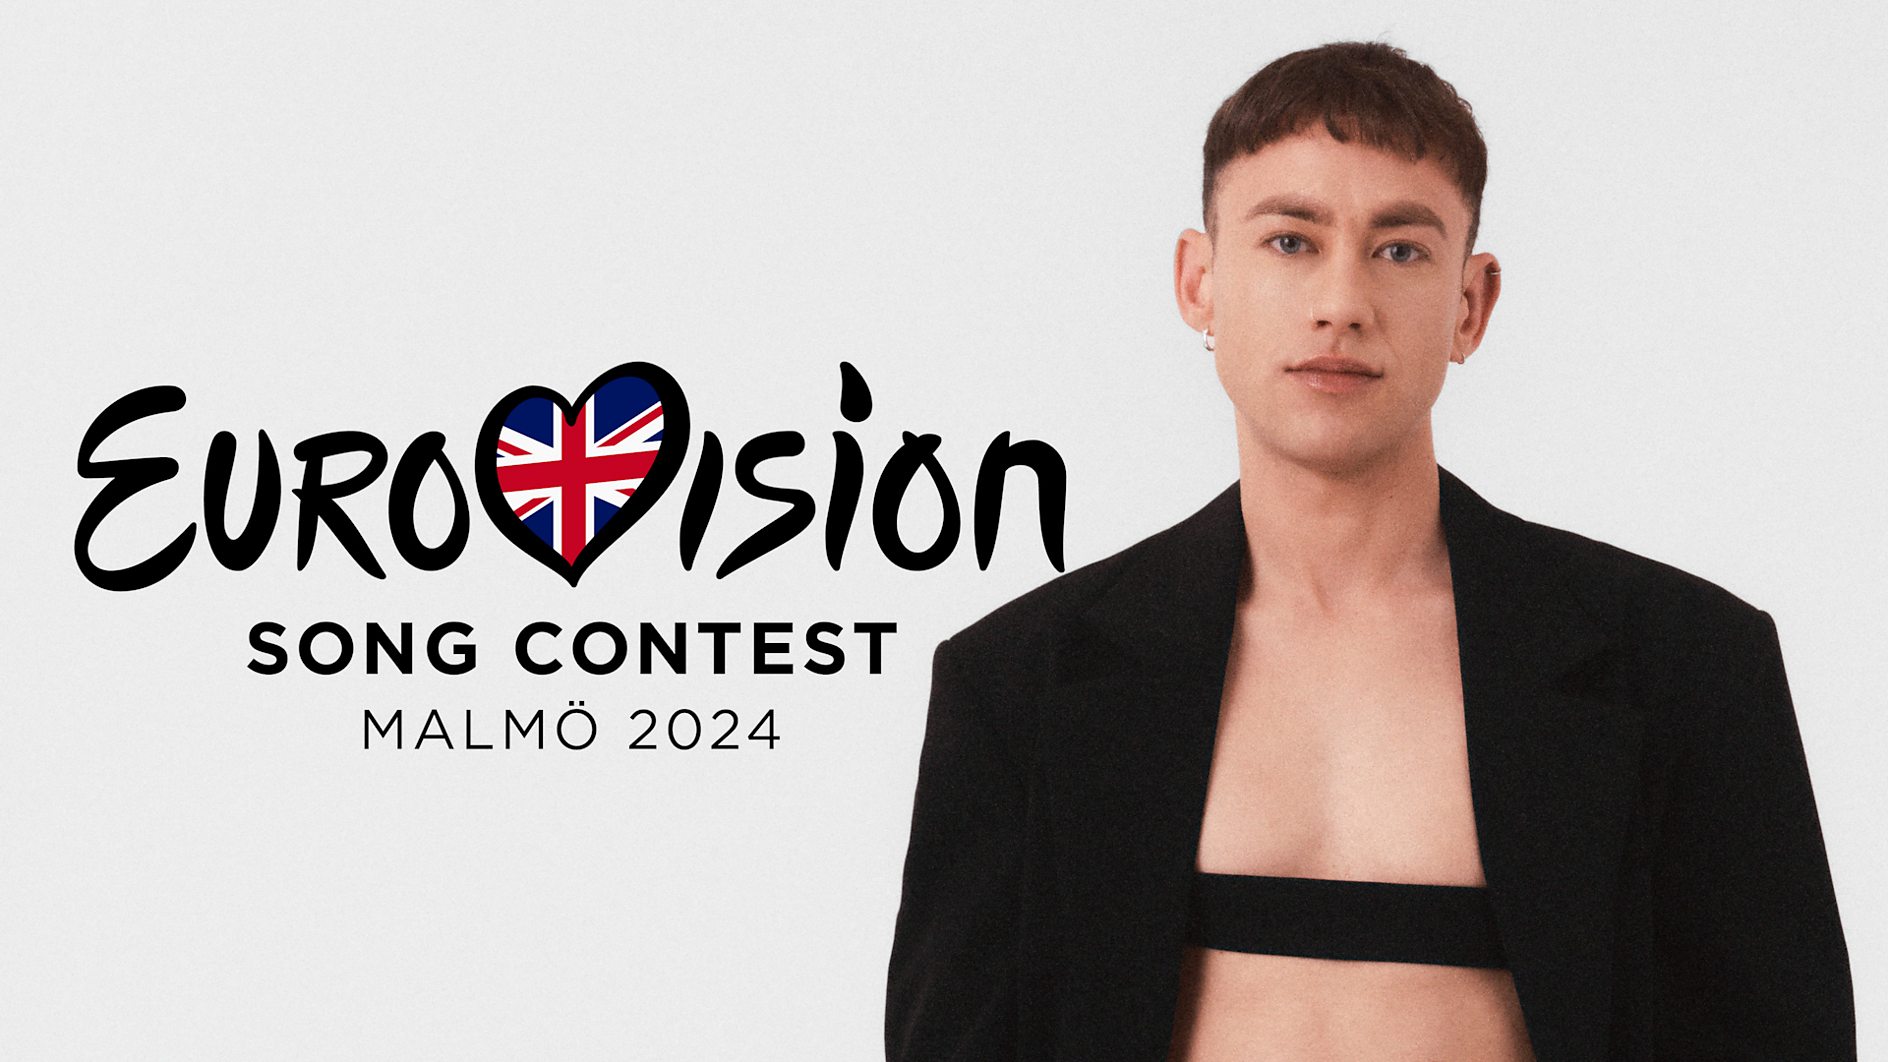 Interview with UK contestant Olly Alexander on Eurovision Song Contest 2024